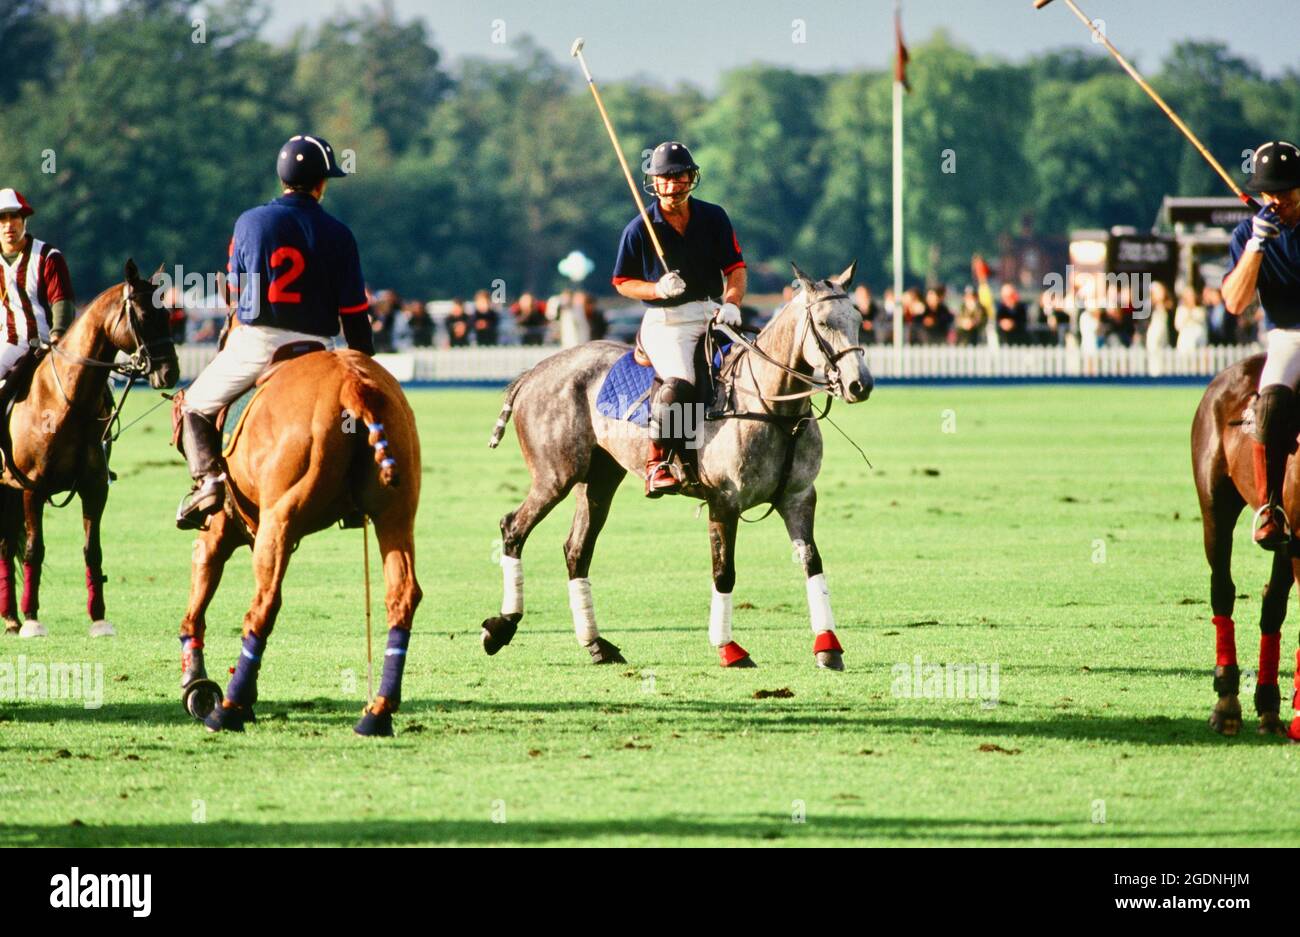 Prince Charles playing Polo, Cartier International Polo, Guards Polo Club, Smith's Lawn, Windsor, Berkshire. UK Stock Photo